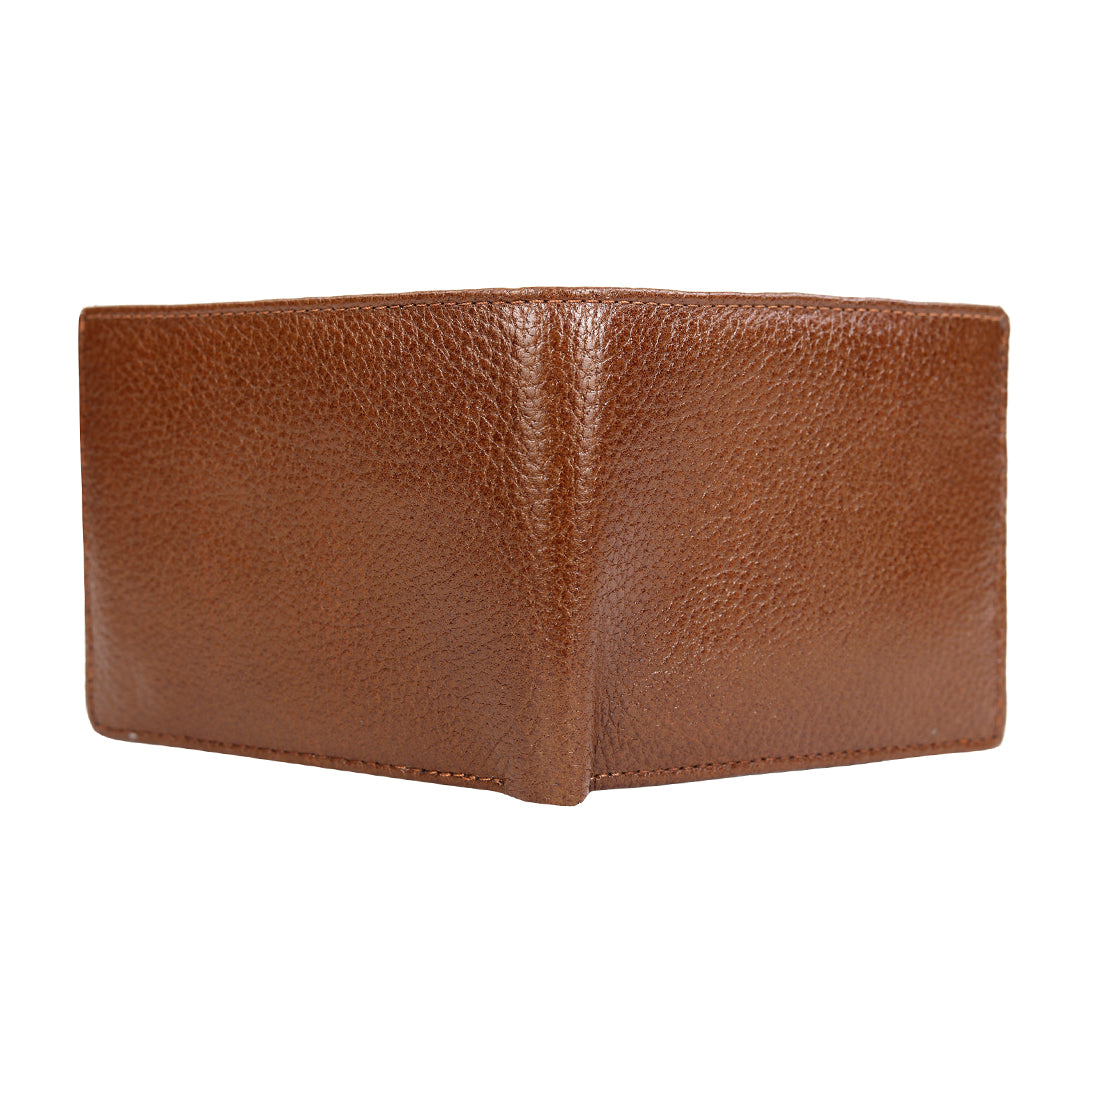 Leather World Genuine Grained Leather Wallet For Men